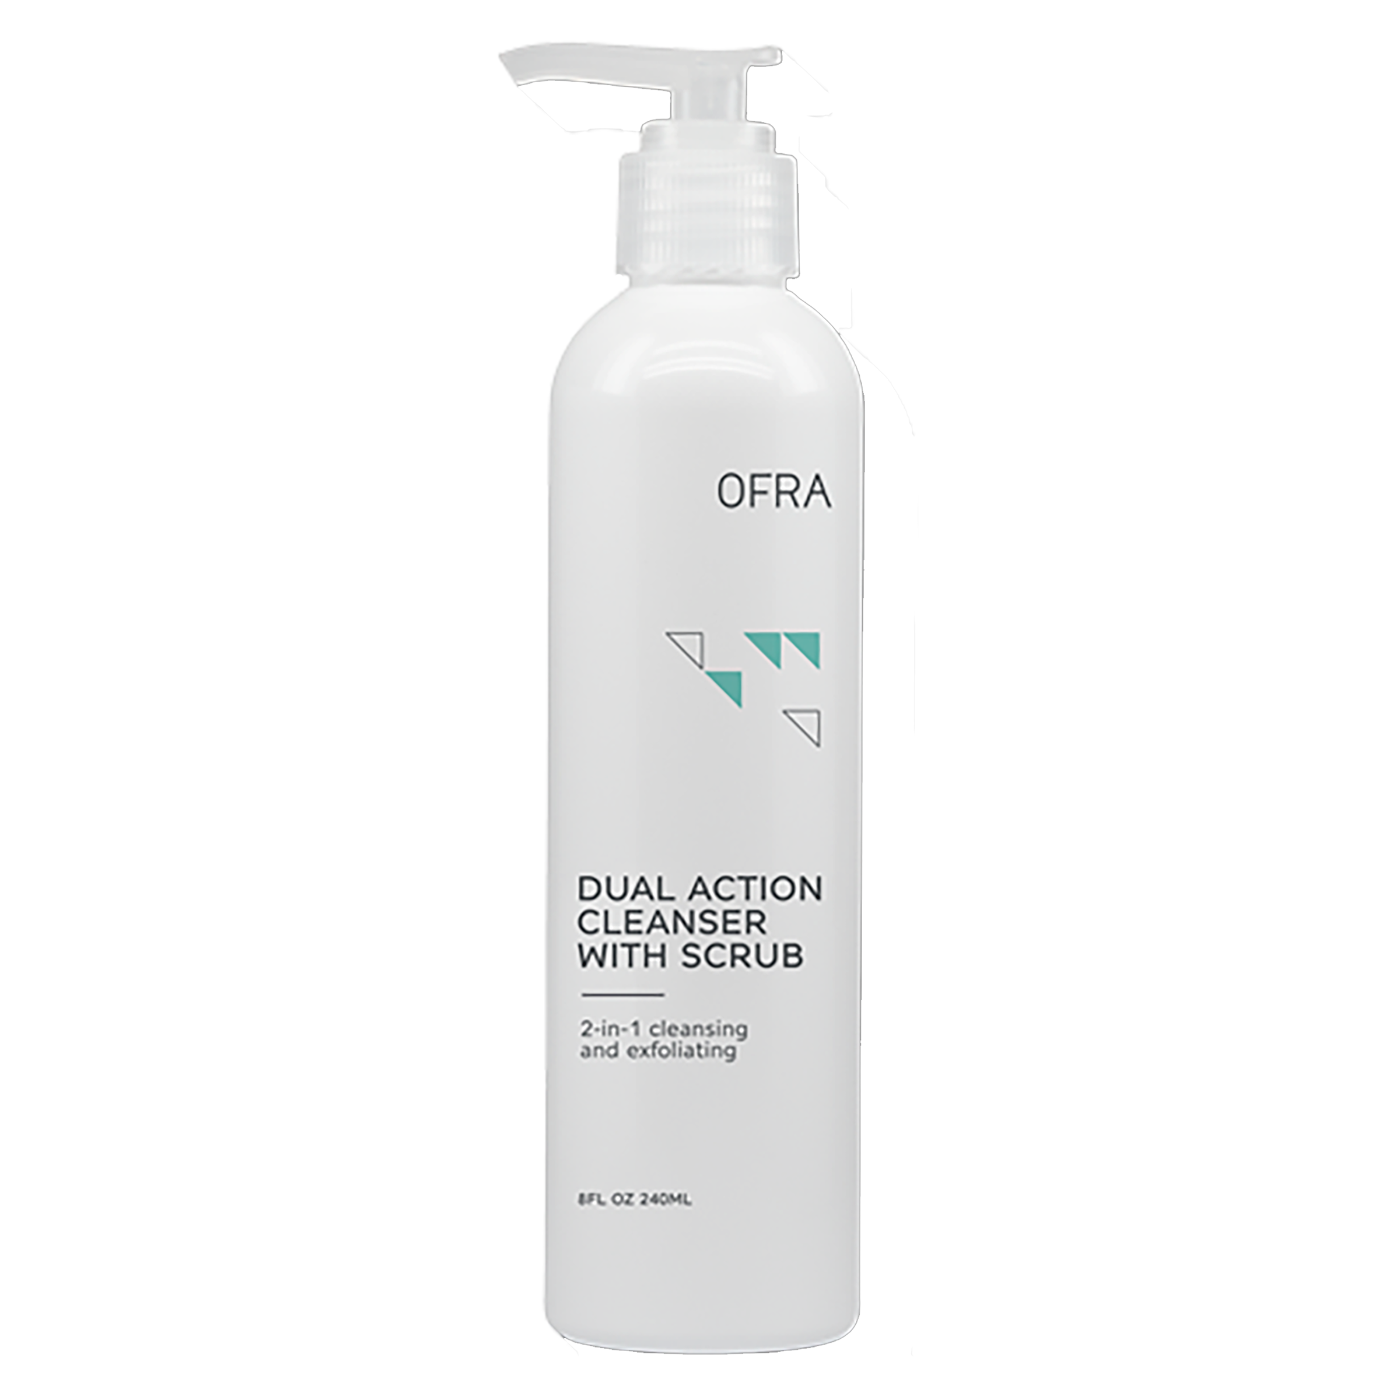 Dual Action Cleanser with Scrub - 8 oz.